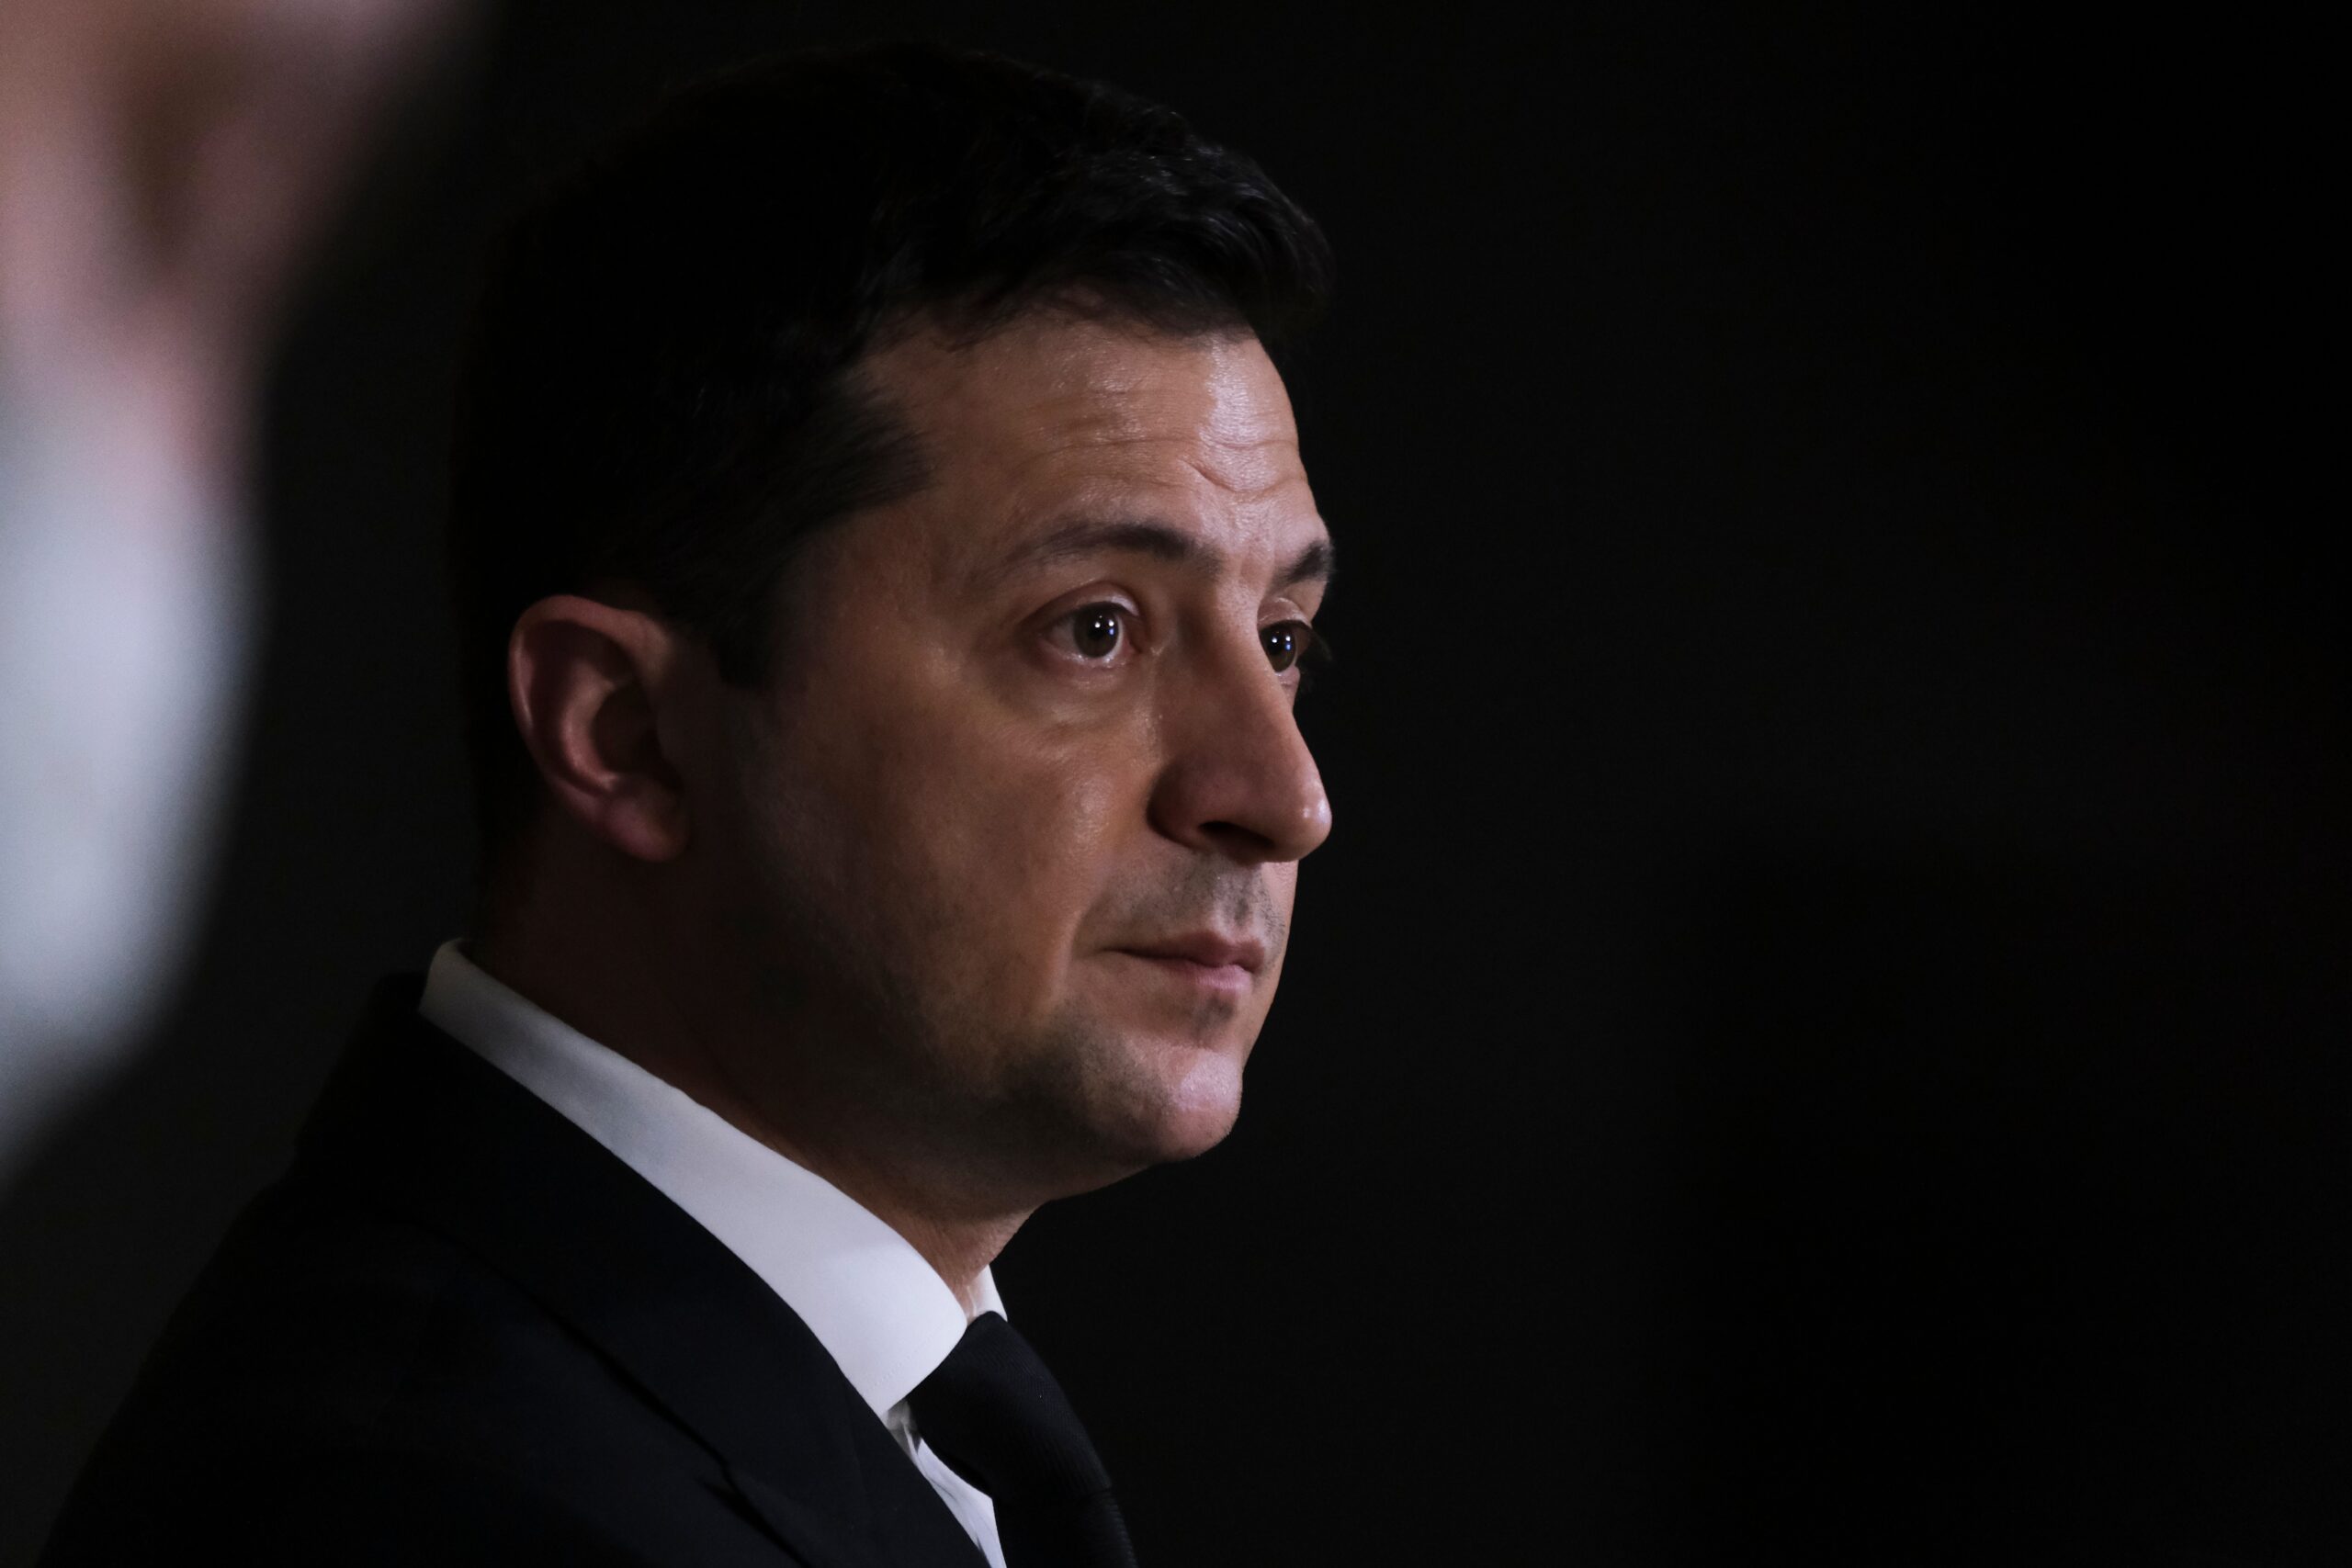 Zelensky Receives Polling Blow from His Former Top Lieutenant